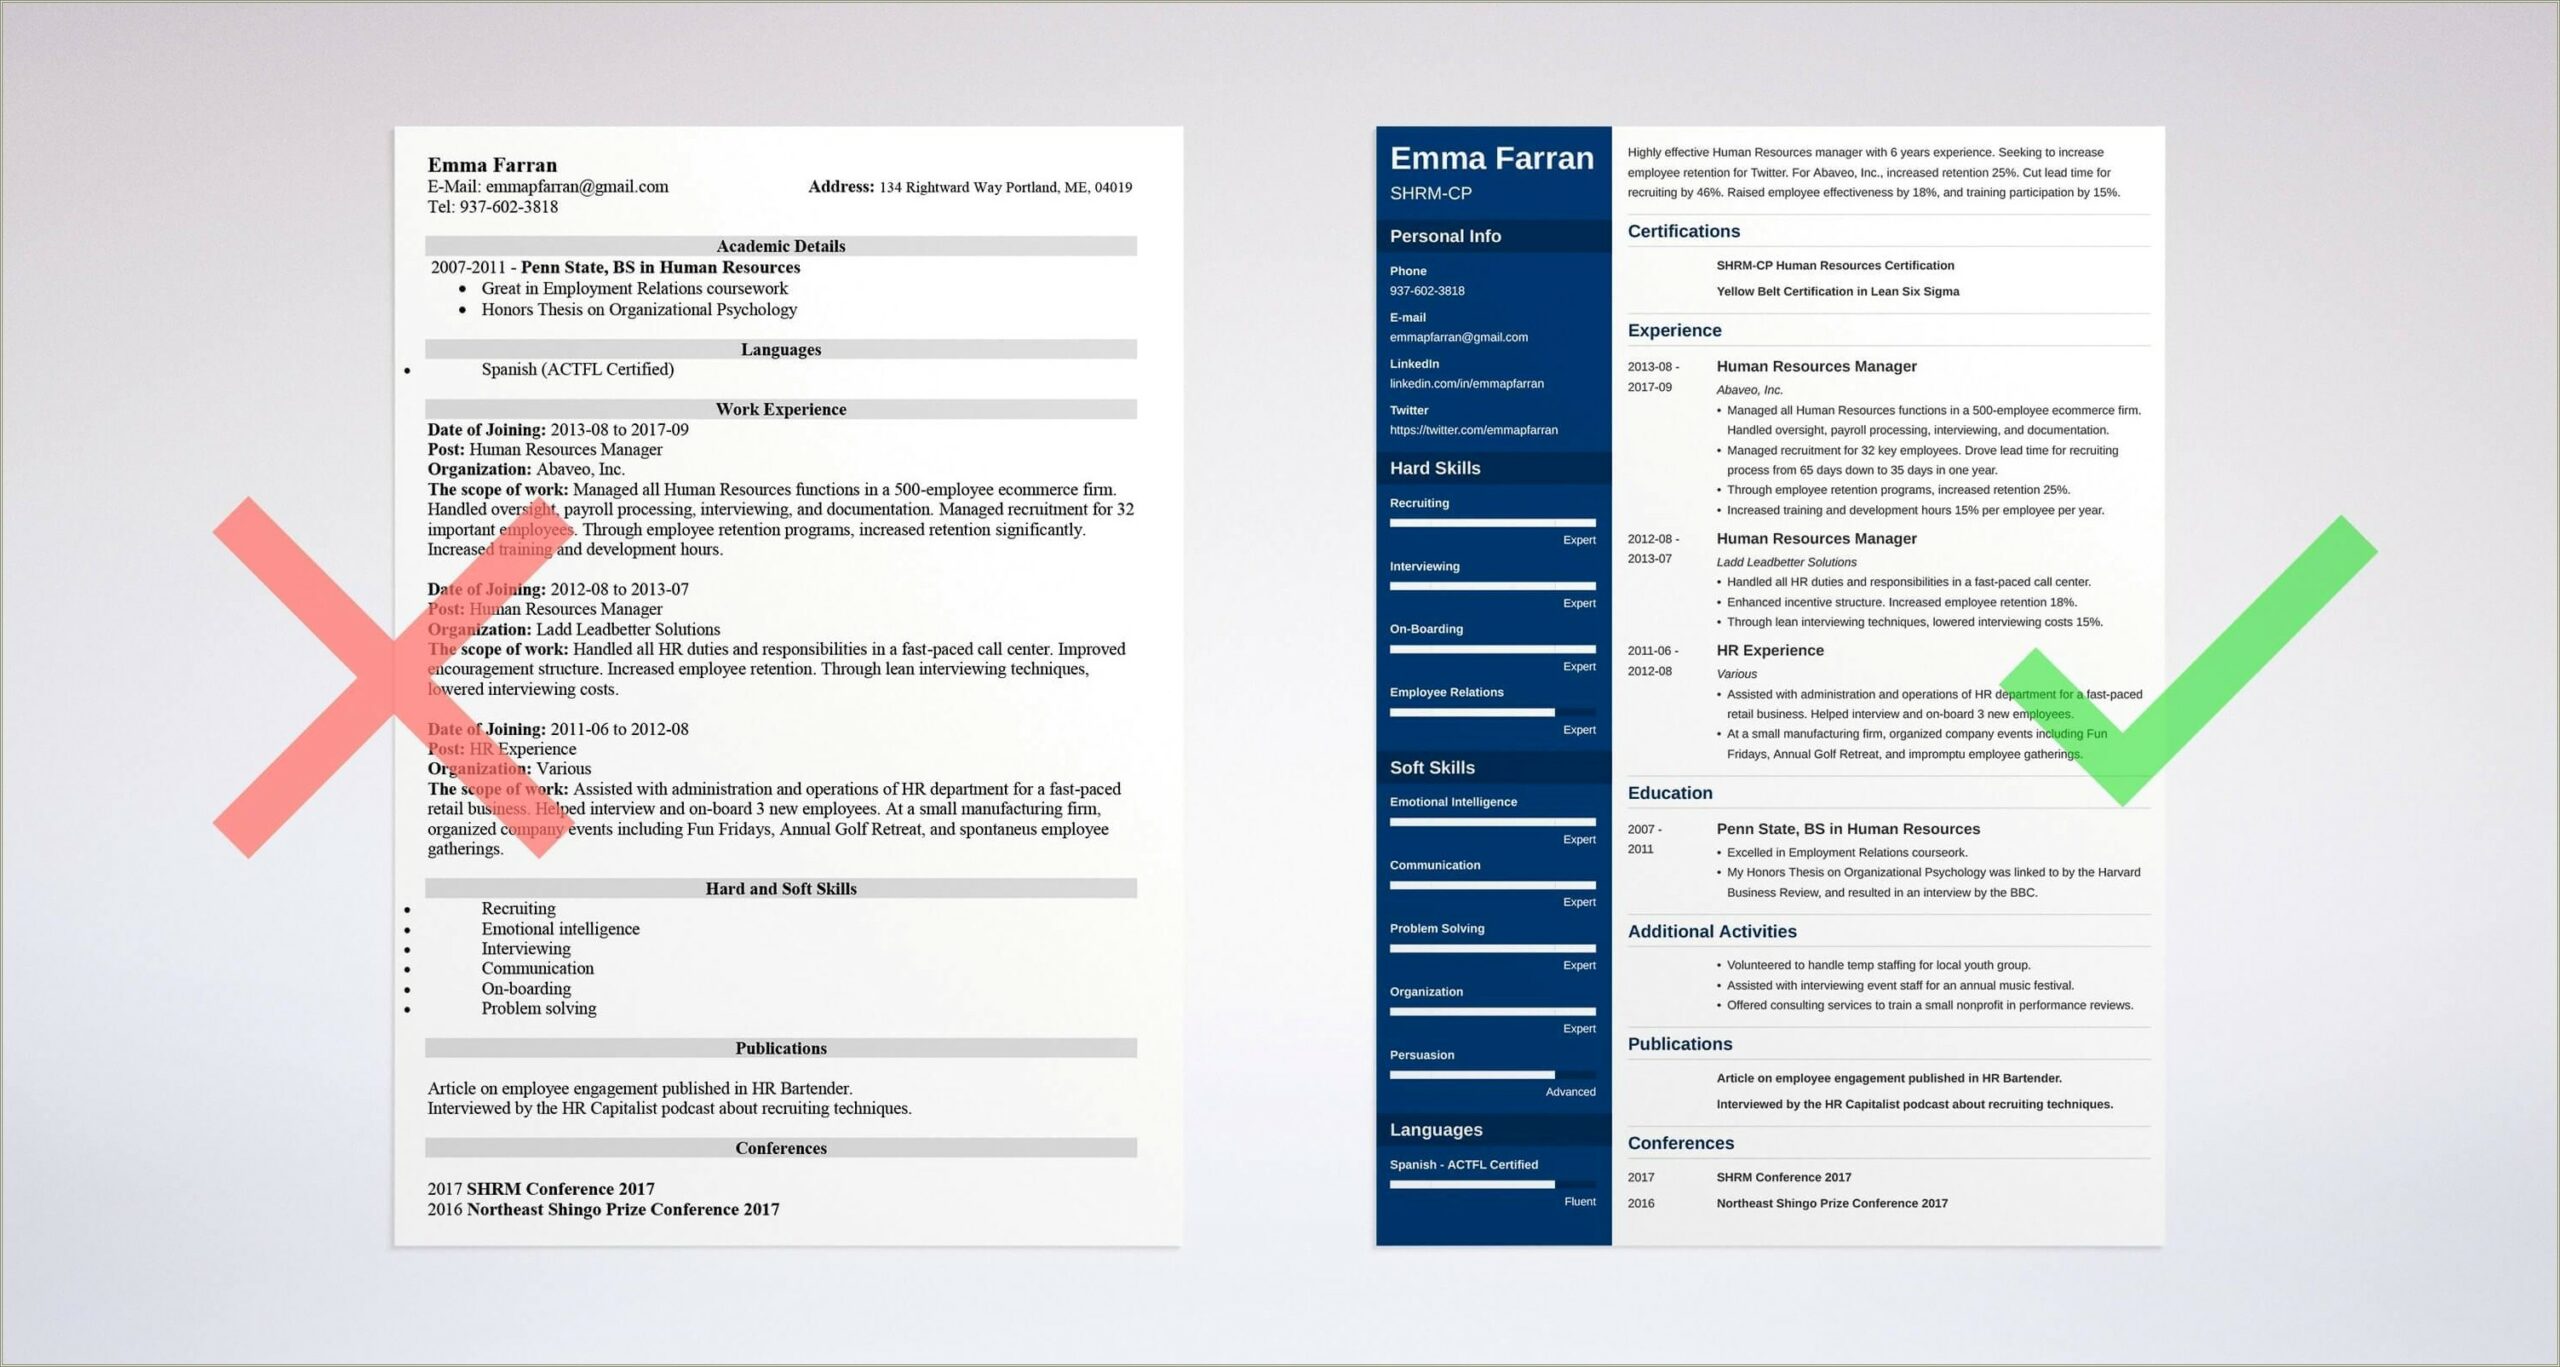 Best Resume Format For Human Resources